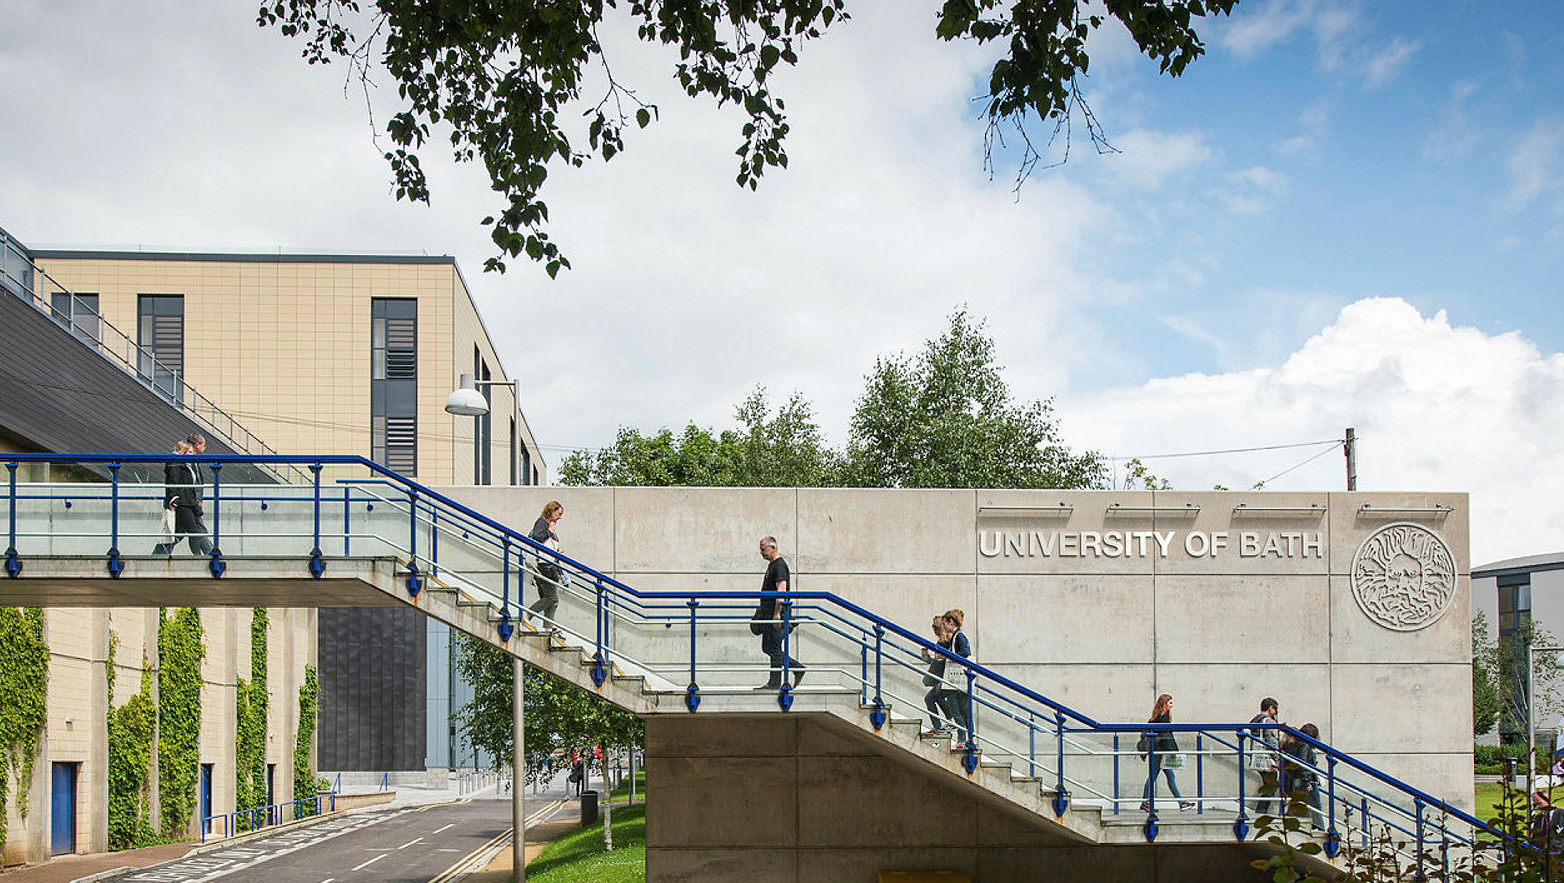 people walking over a bridge with University of Bath buildings and logo in the background